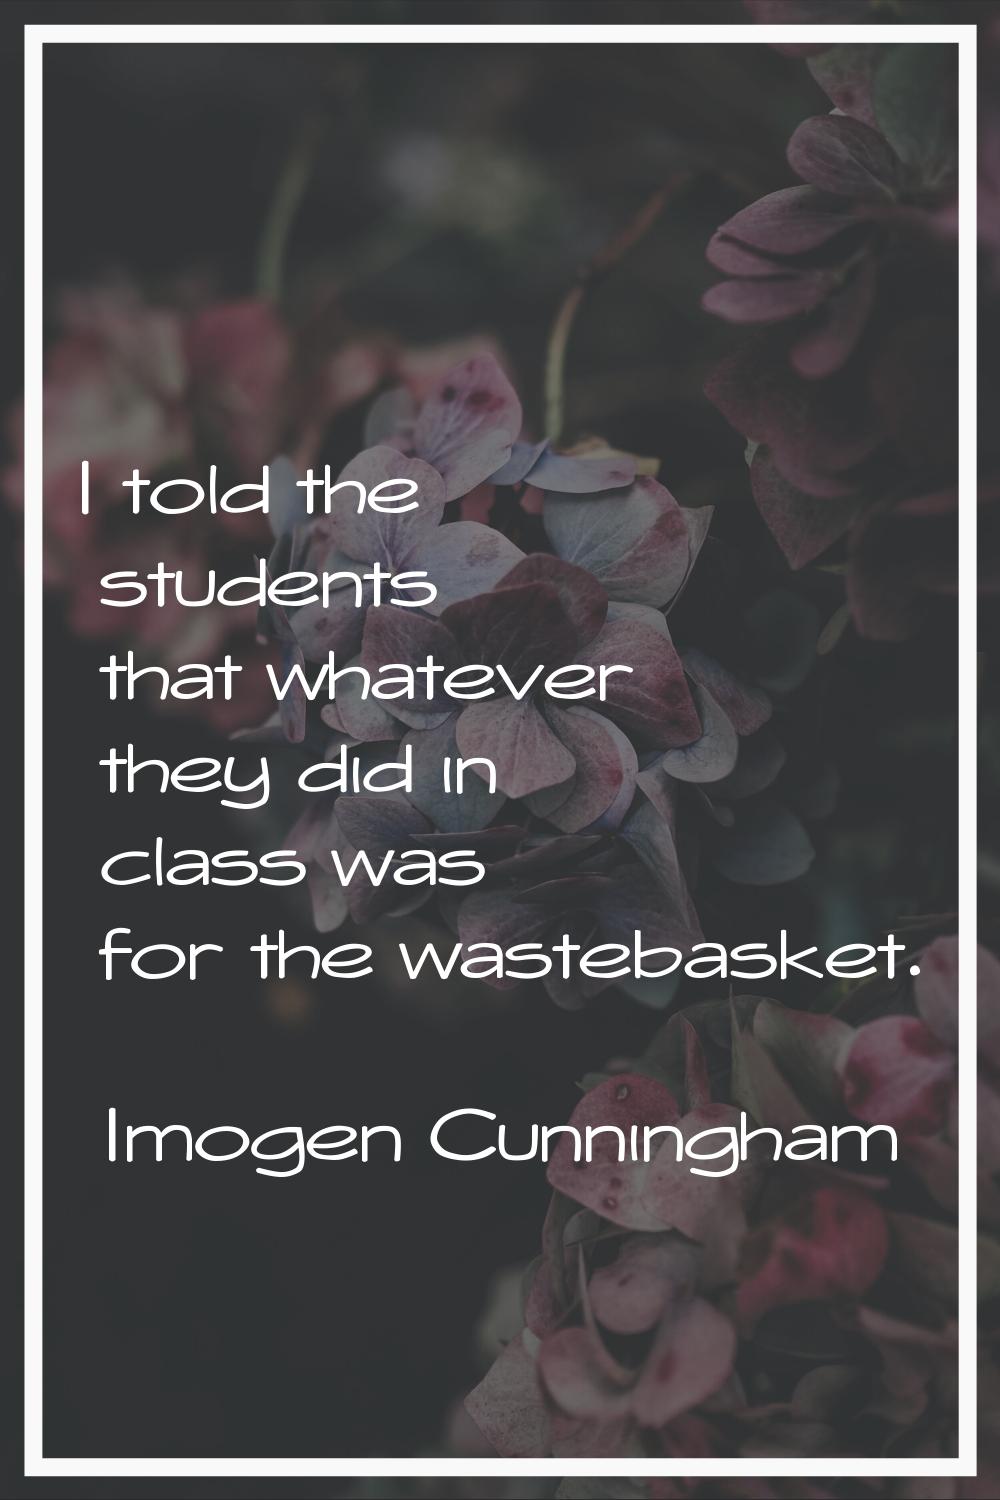 I told the students that whatever they did in class was for the wastebasket.